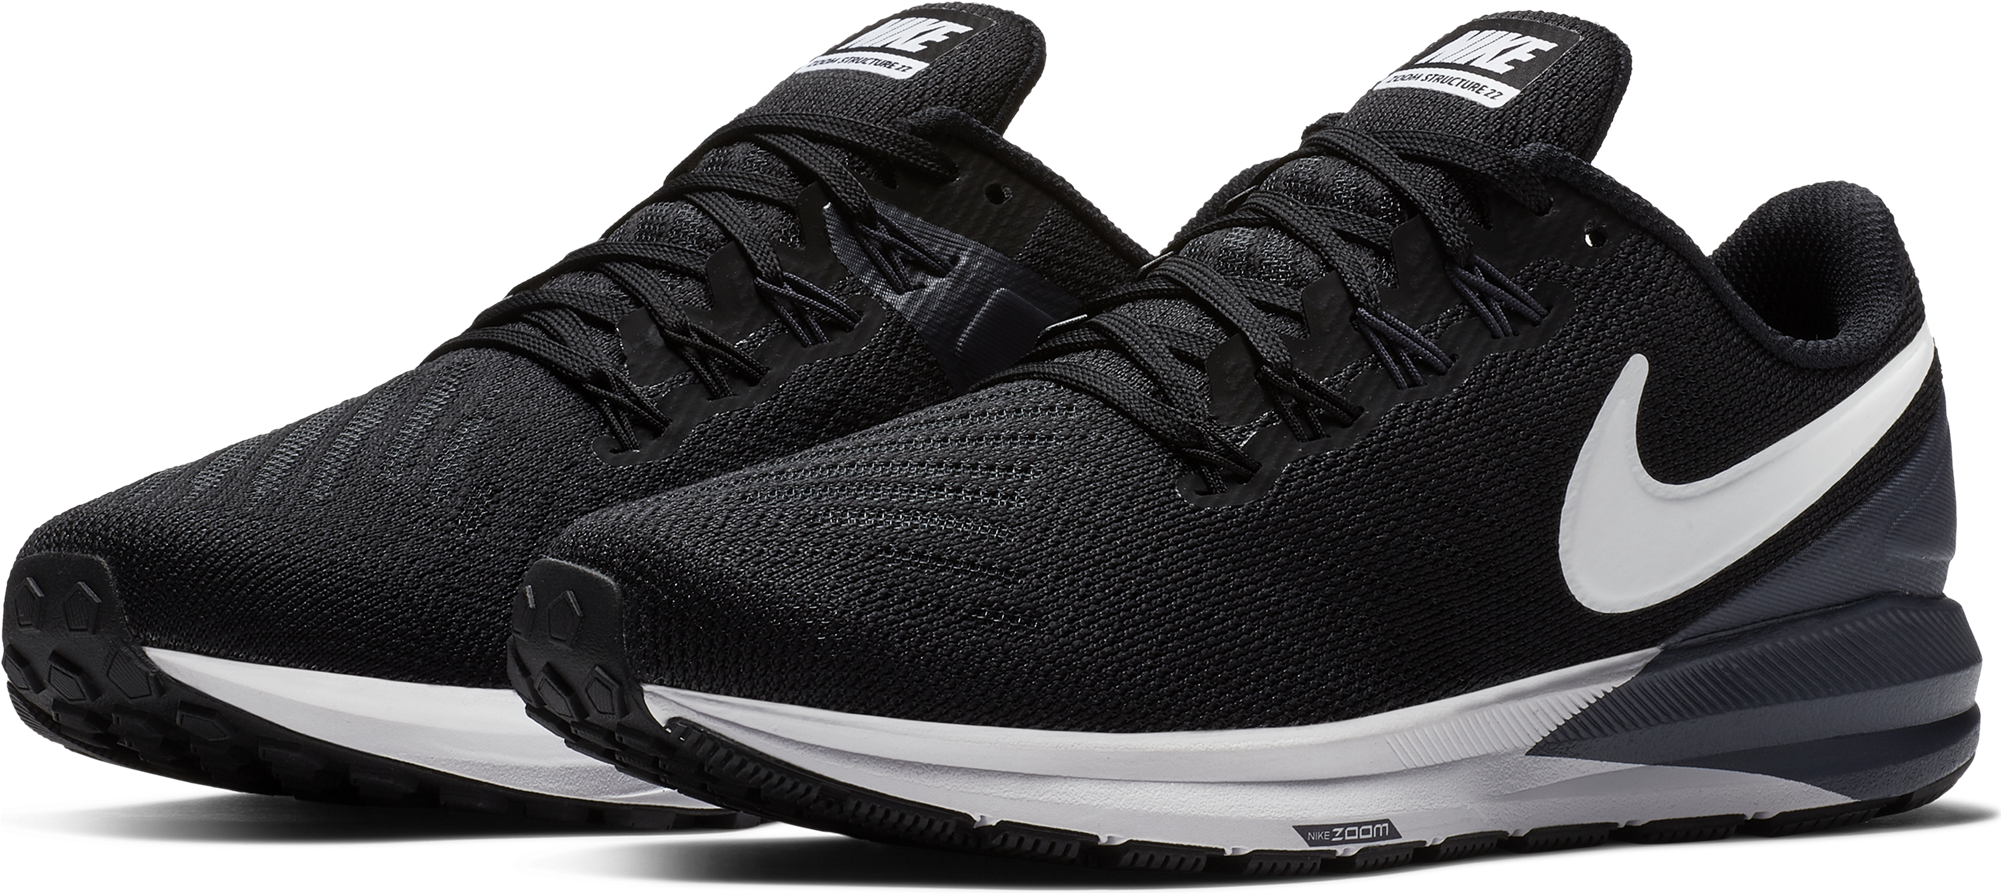 Download Air Zoom Structure 22 Running Shoe - Nike Air Zoom Pegasus 35 PNG Image with No Background - PNGkey.com